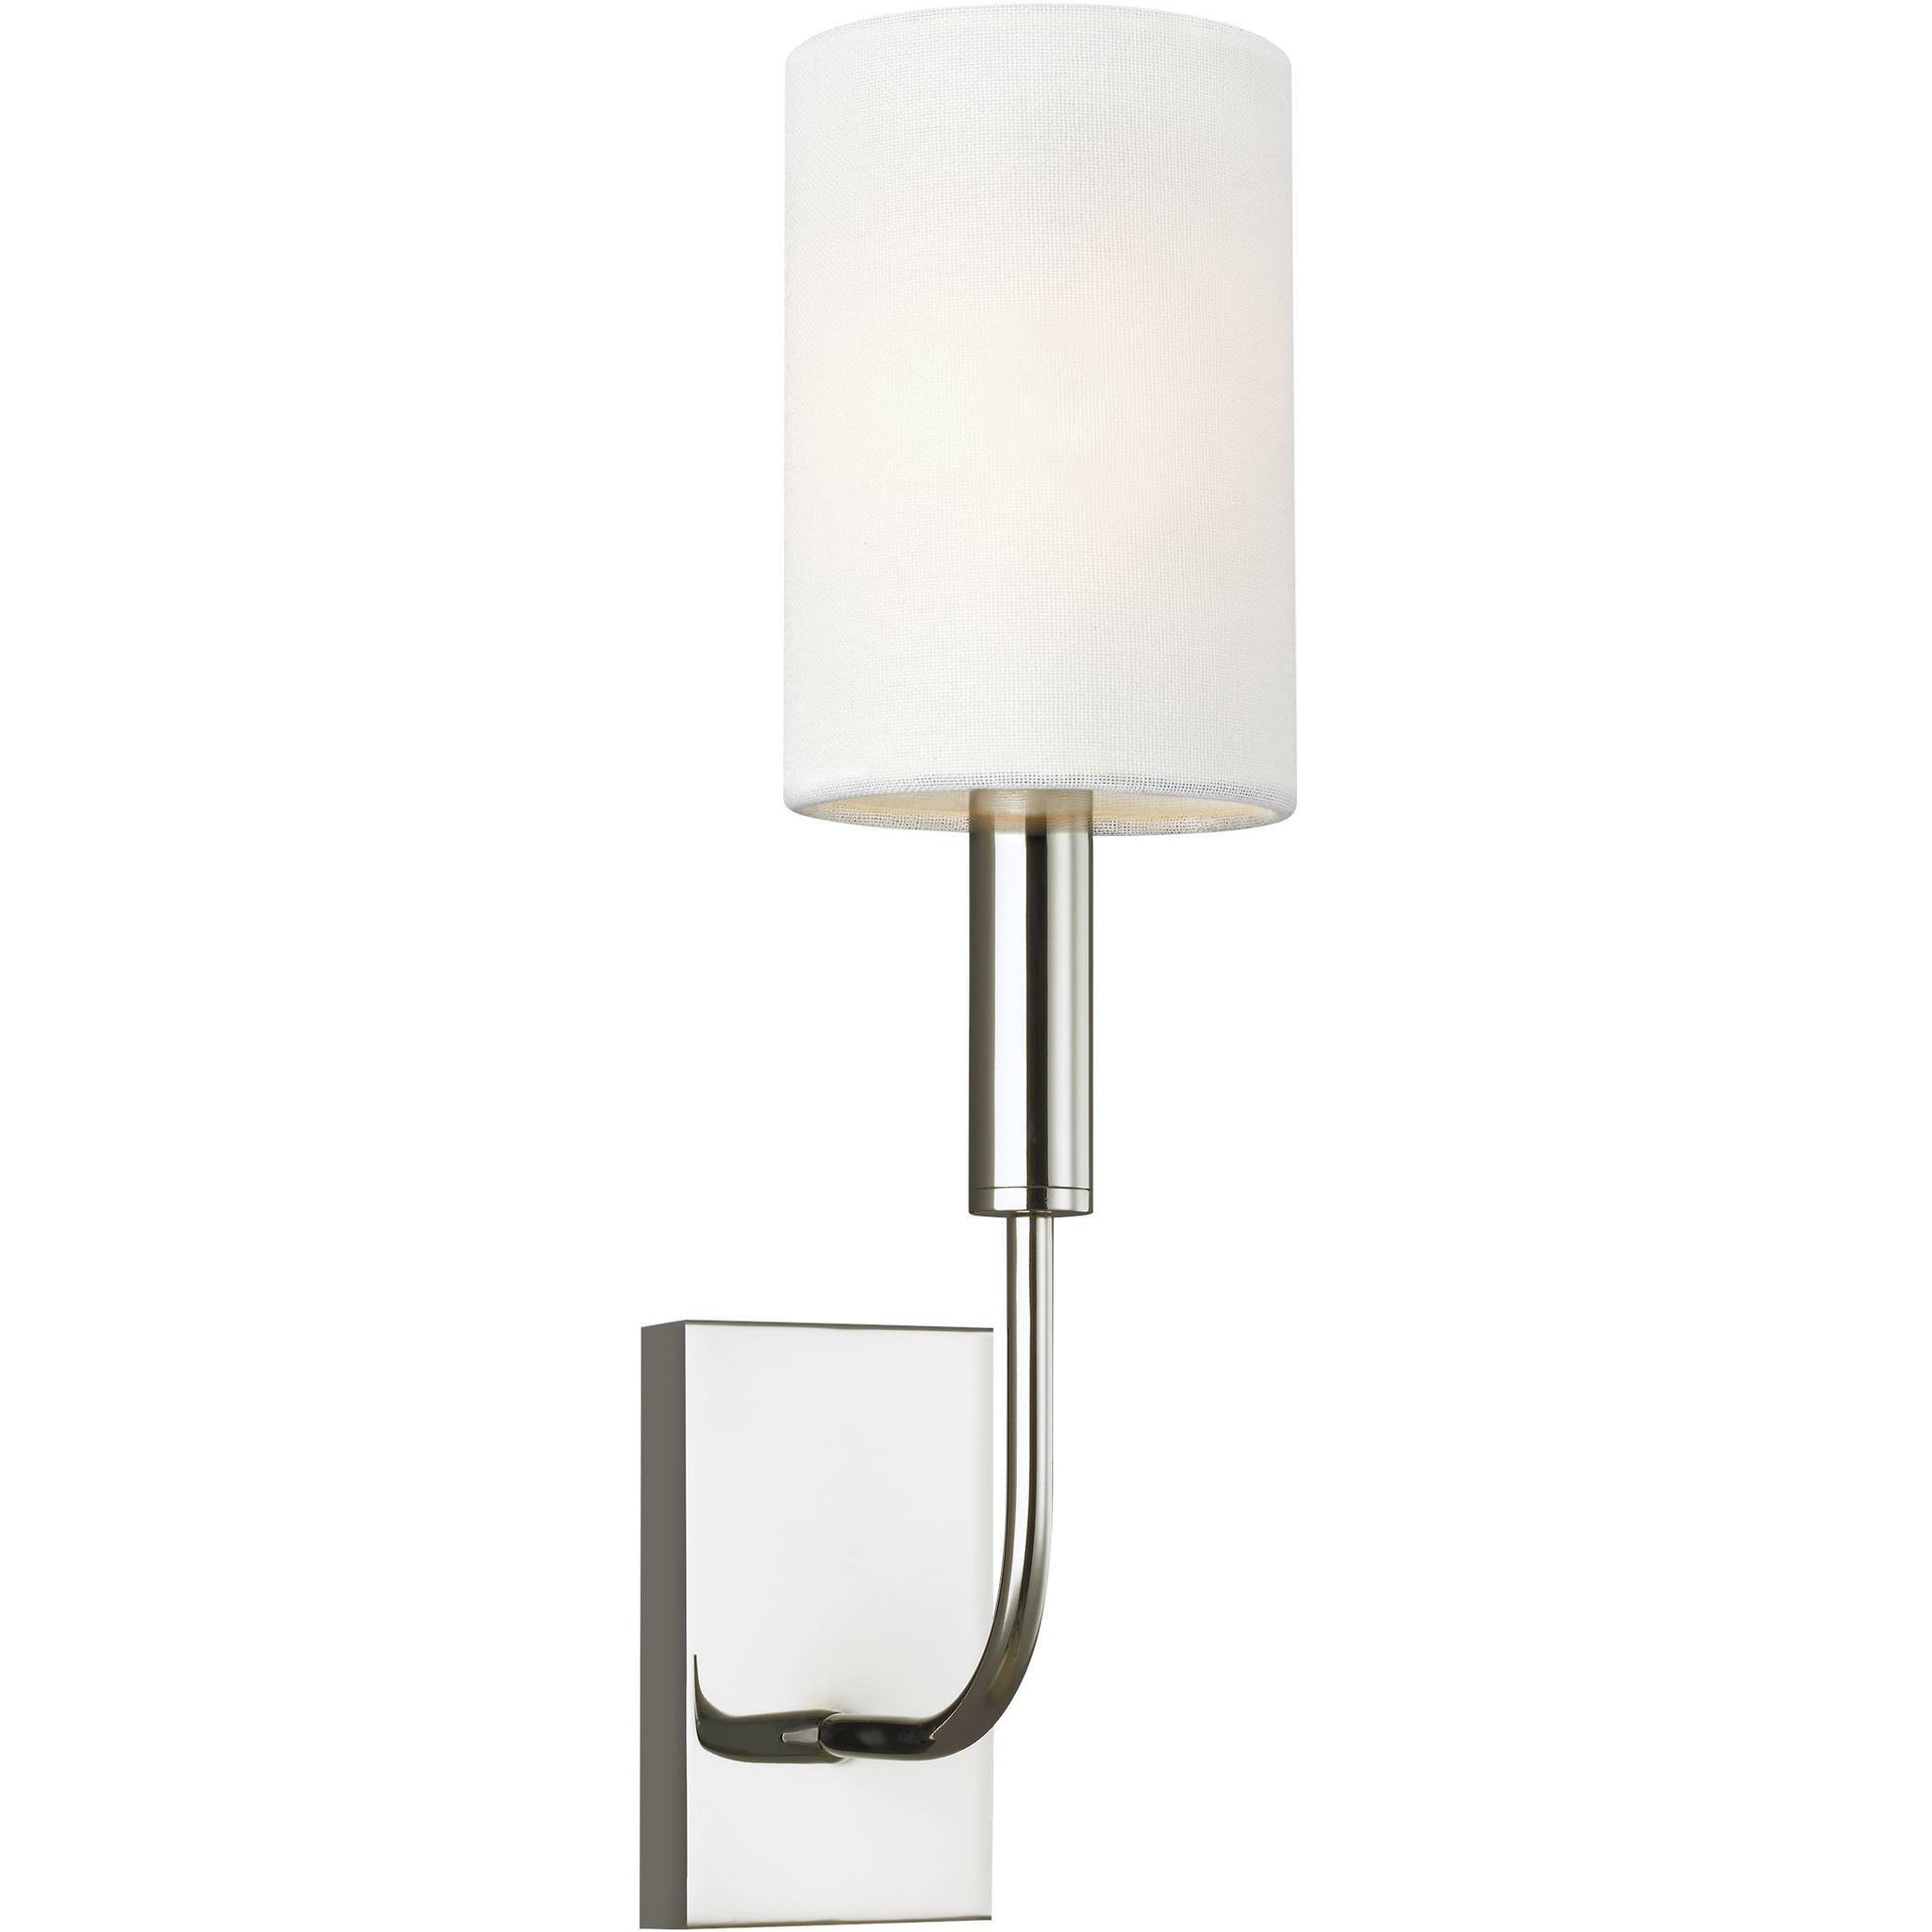 Brianna Sconce Polished Nickel